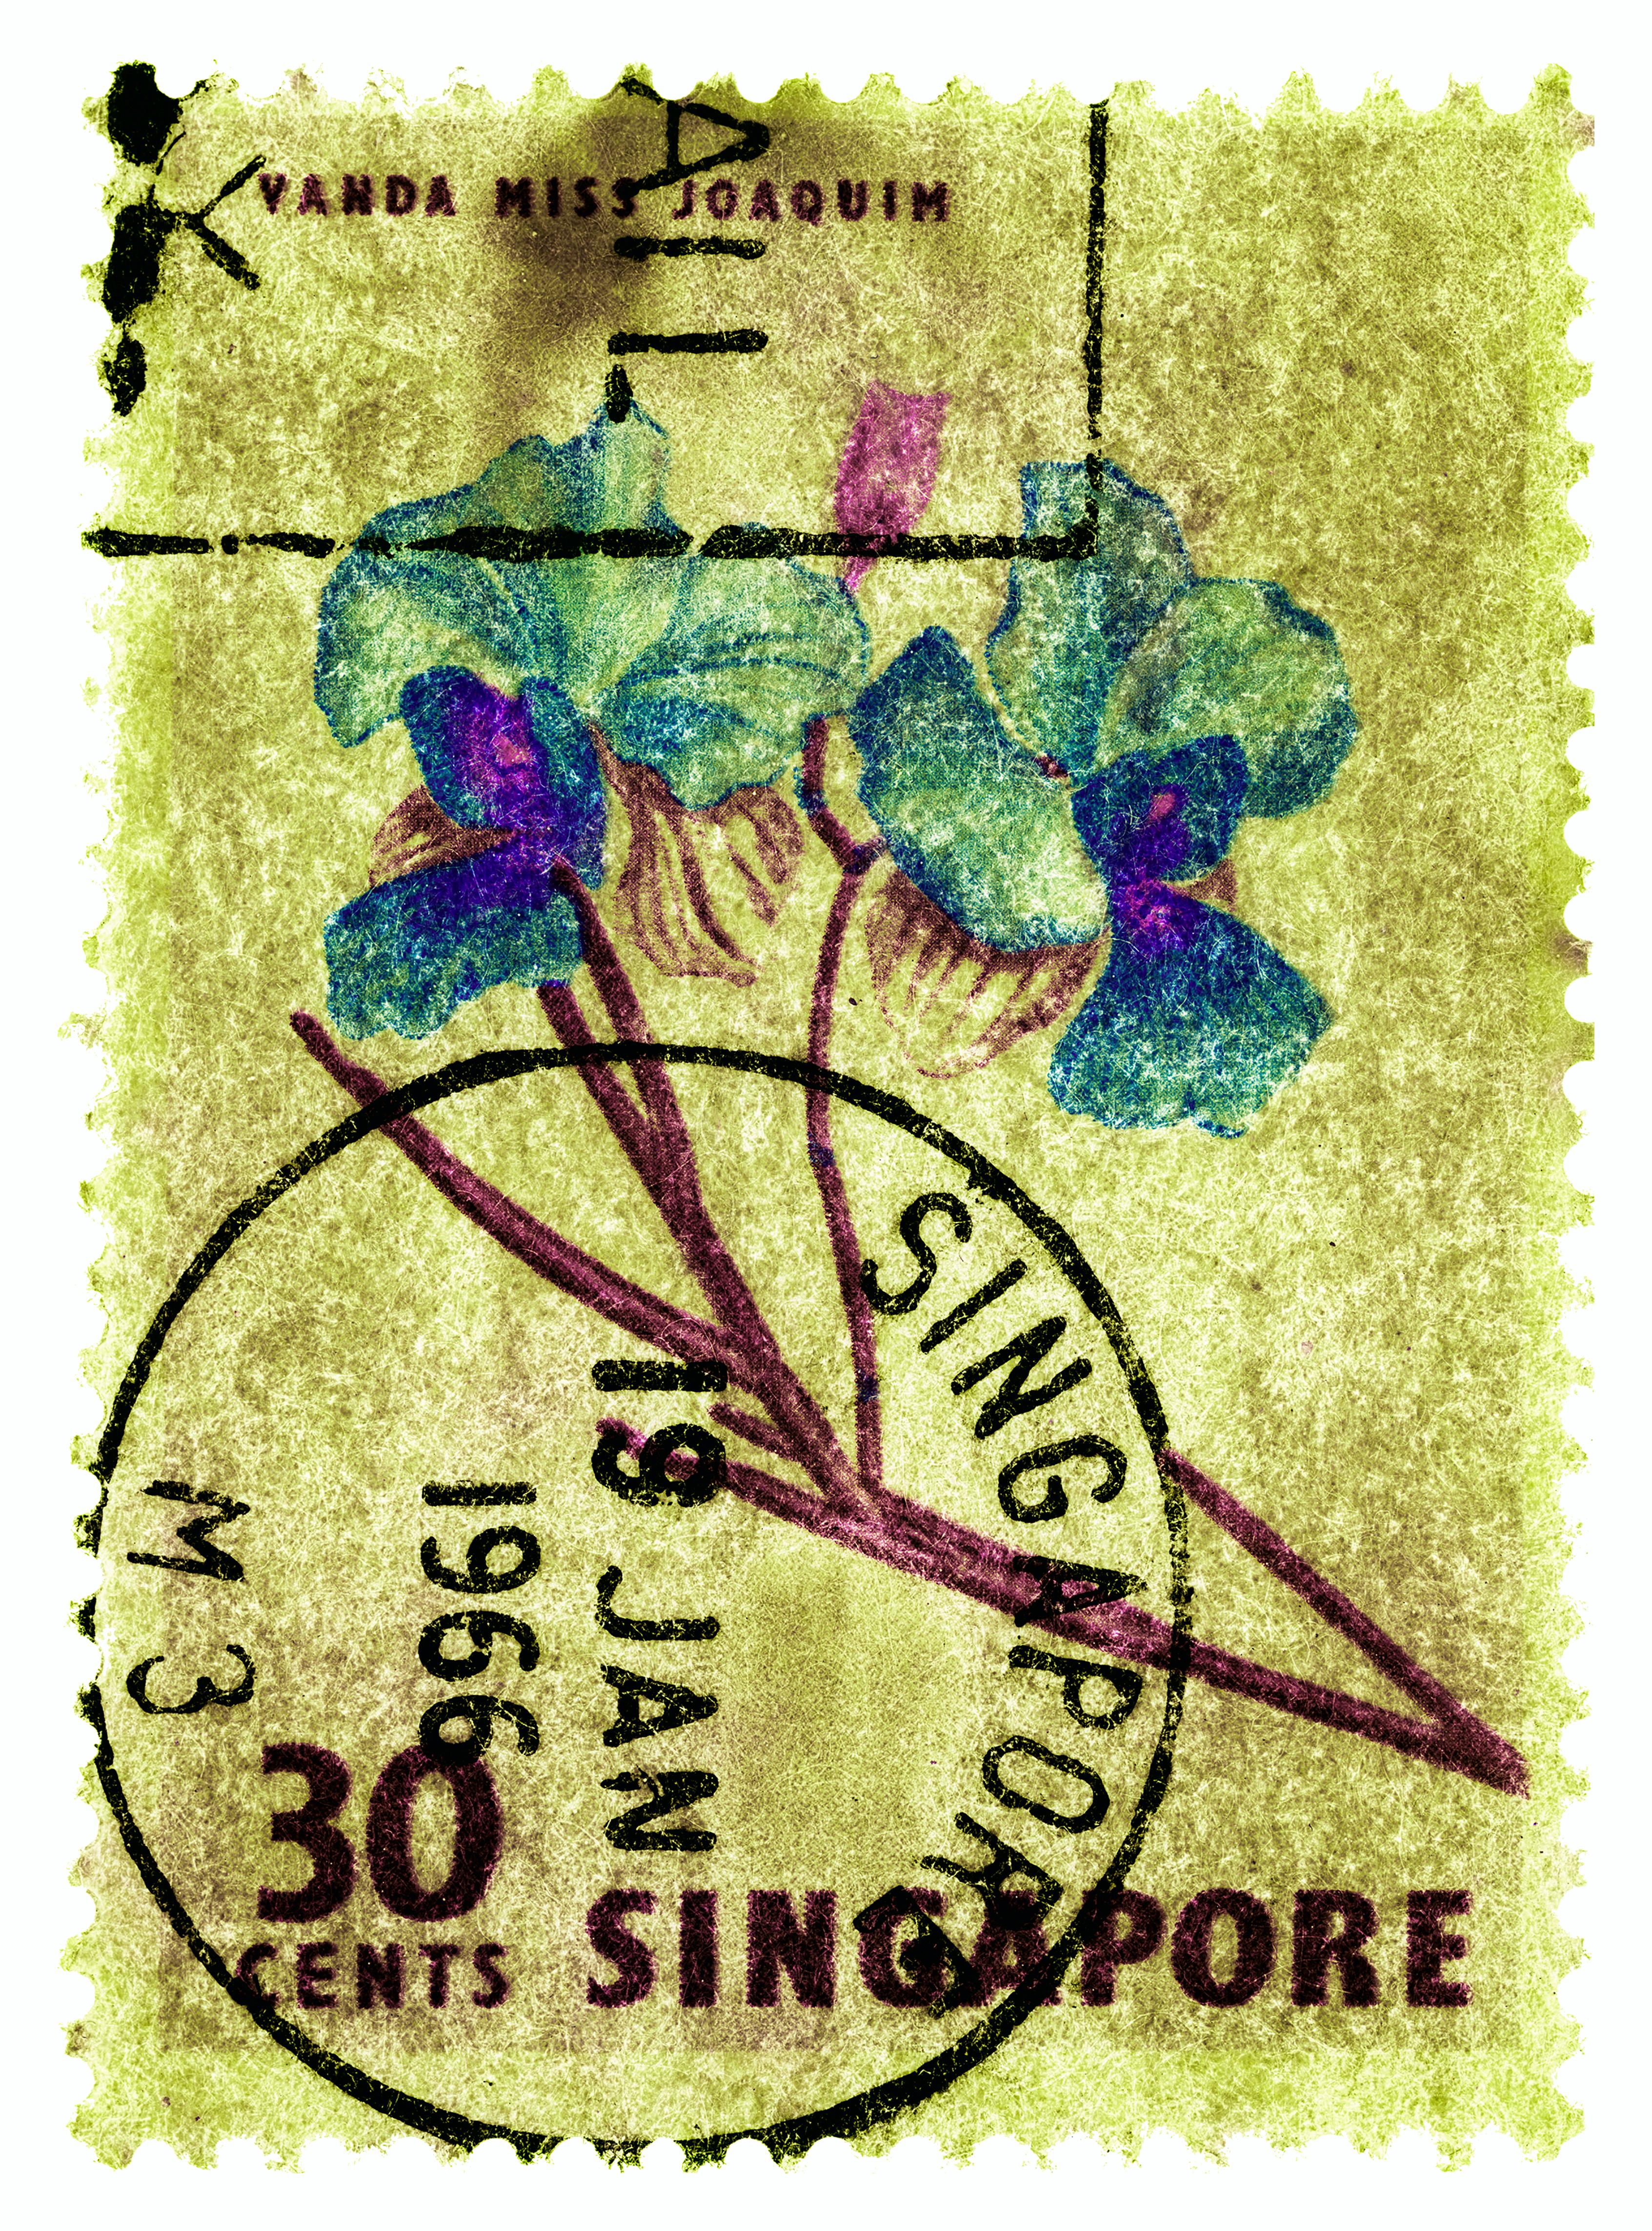 30 Cents Singapore Orchid, from the Heidler & Heeps Stamp Collection.
These historic postage stamps that make up the Heidler & Heeps Stamp Collection, Singapore Series 'Postcards from Afar' have been given a twenty-first century pop art lease of